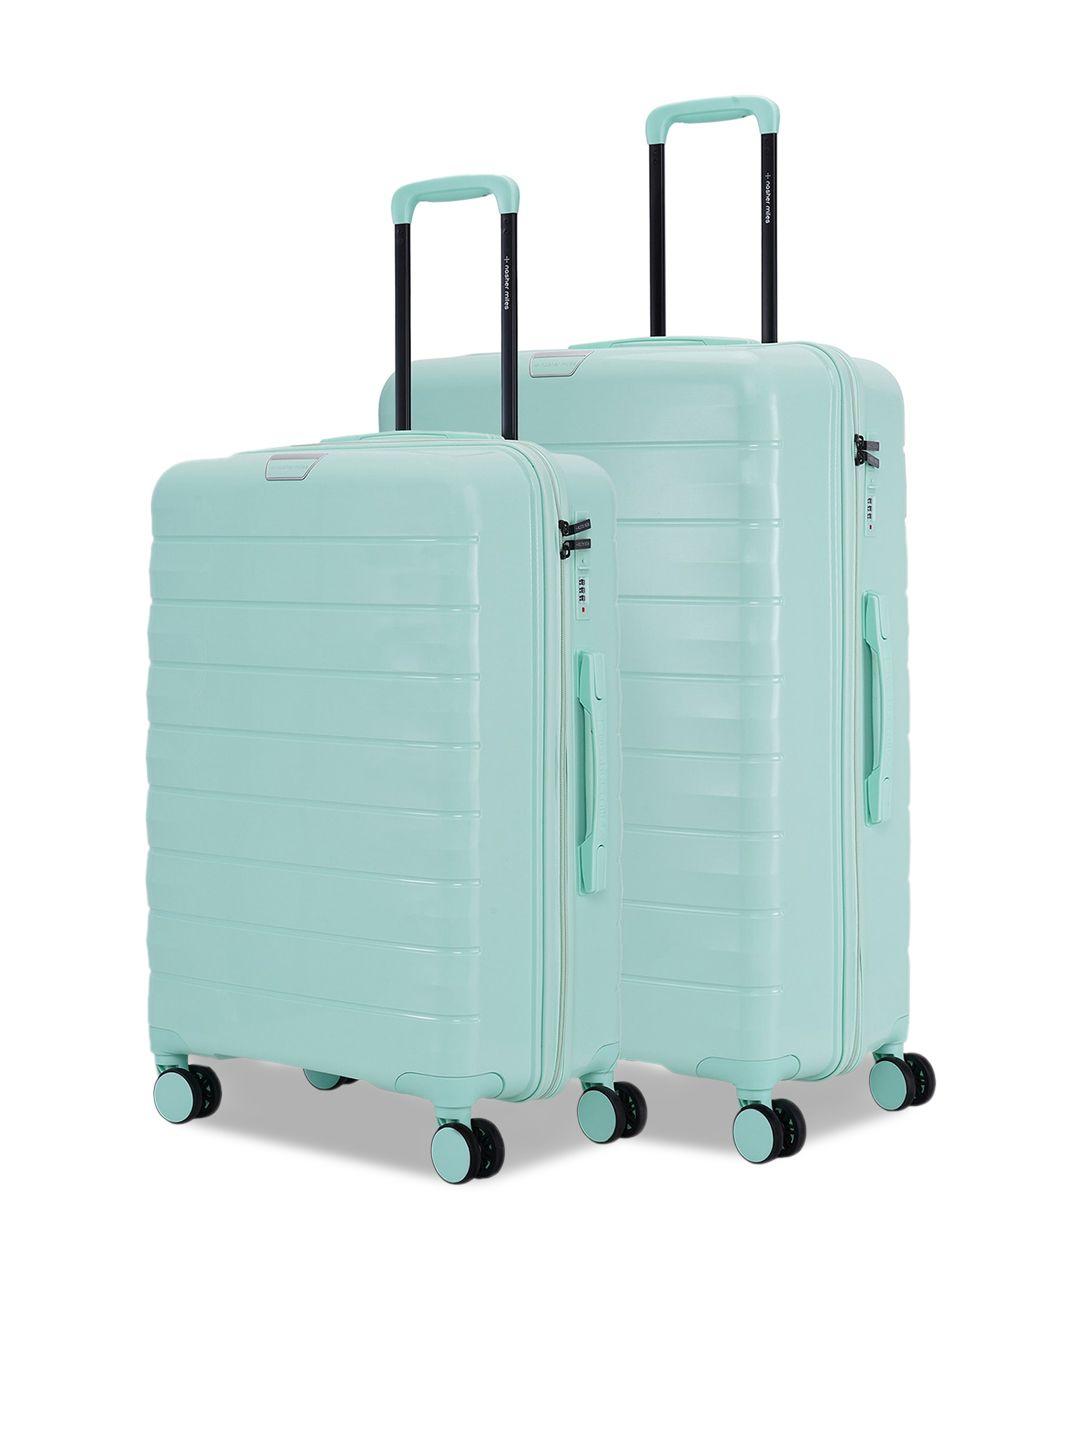 nasher miles vienna set of 2 lightweight hard-sided trolley suitcase